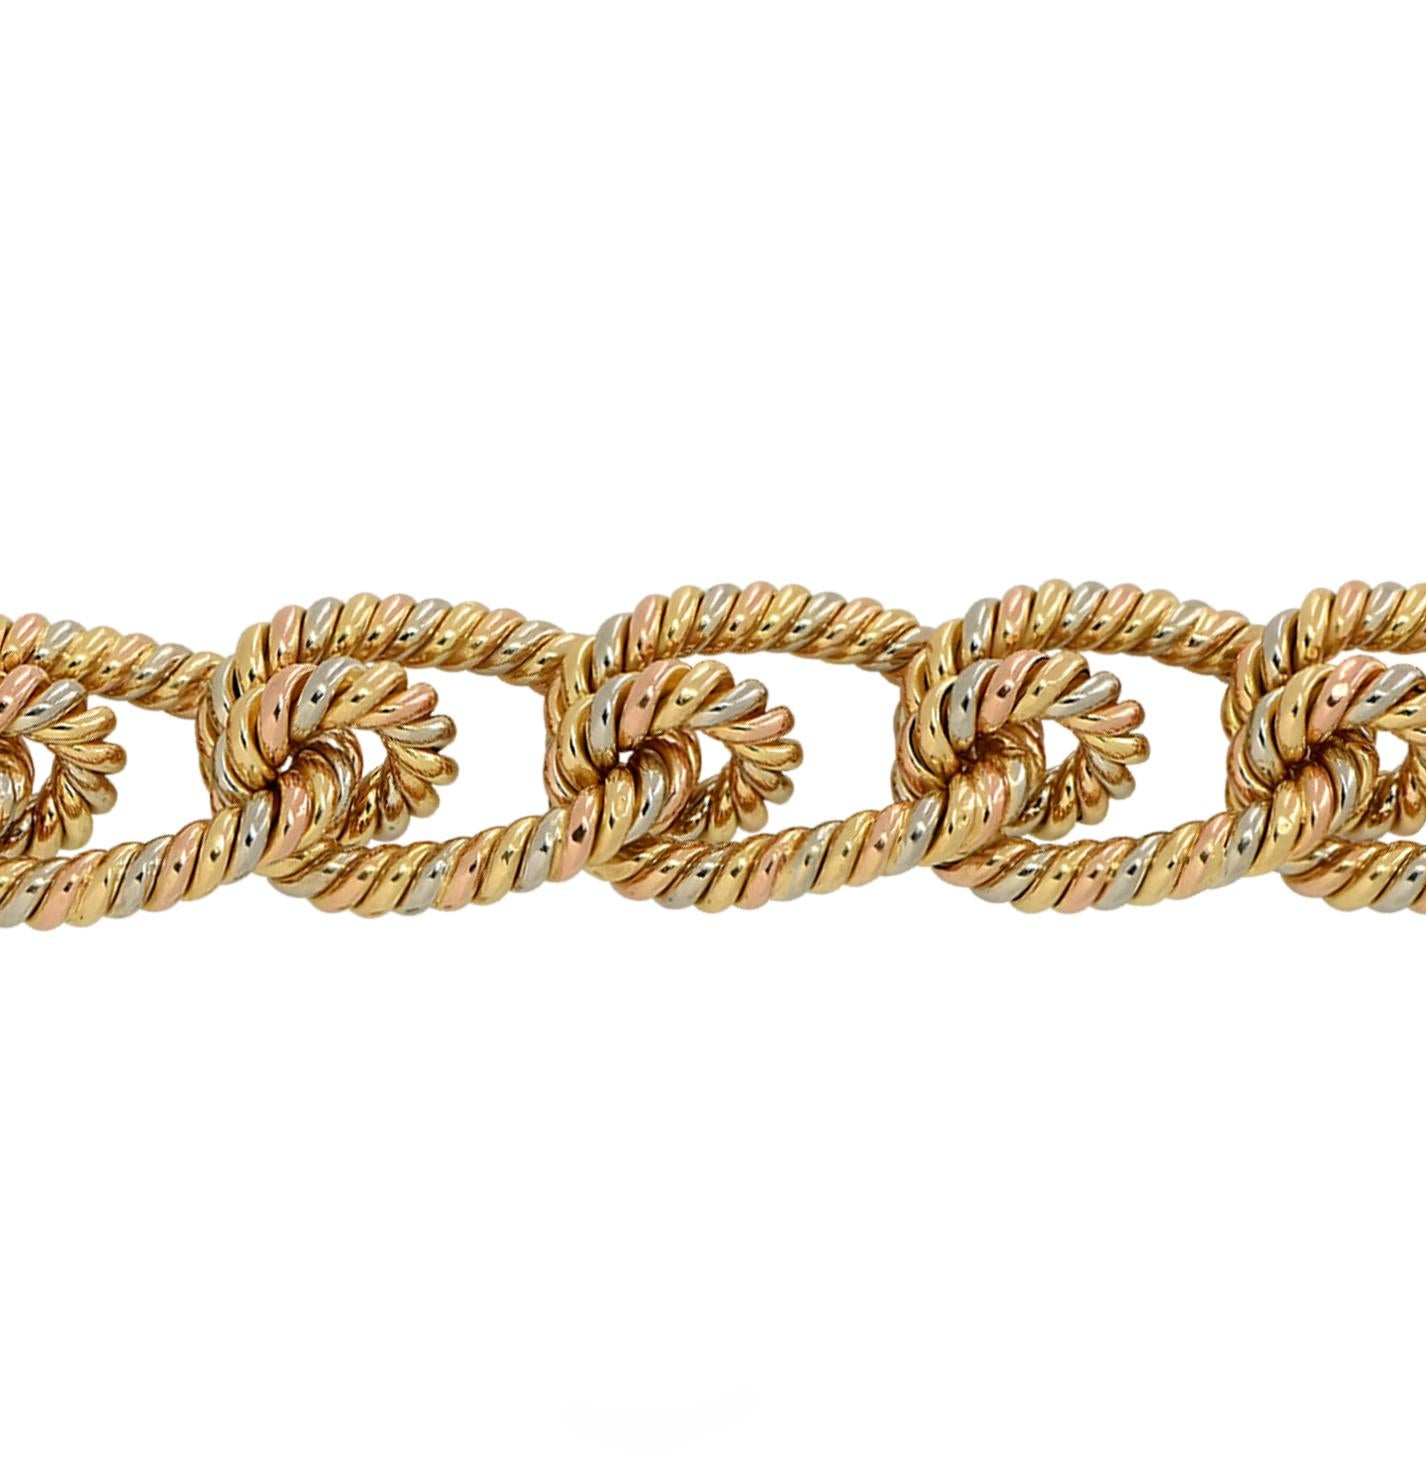 Striking bracelet crafted in 18 karat yellow, white and rose gold twisted to create a rope effect. Tri-color gold rope hoops link together to create this spectacular look. This bracelet measures 8 inches in width and .9 inches in length, and weighs